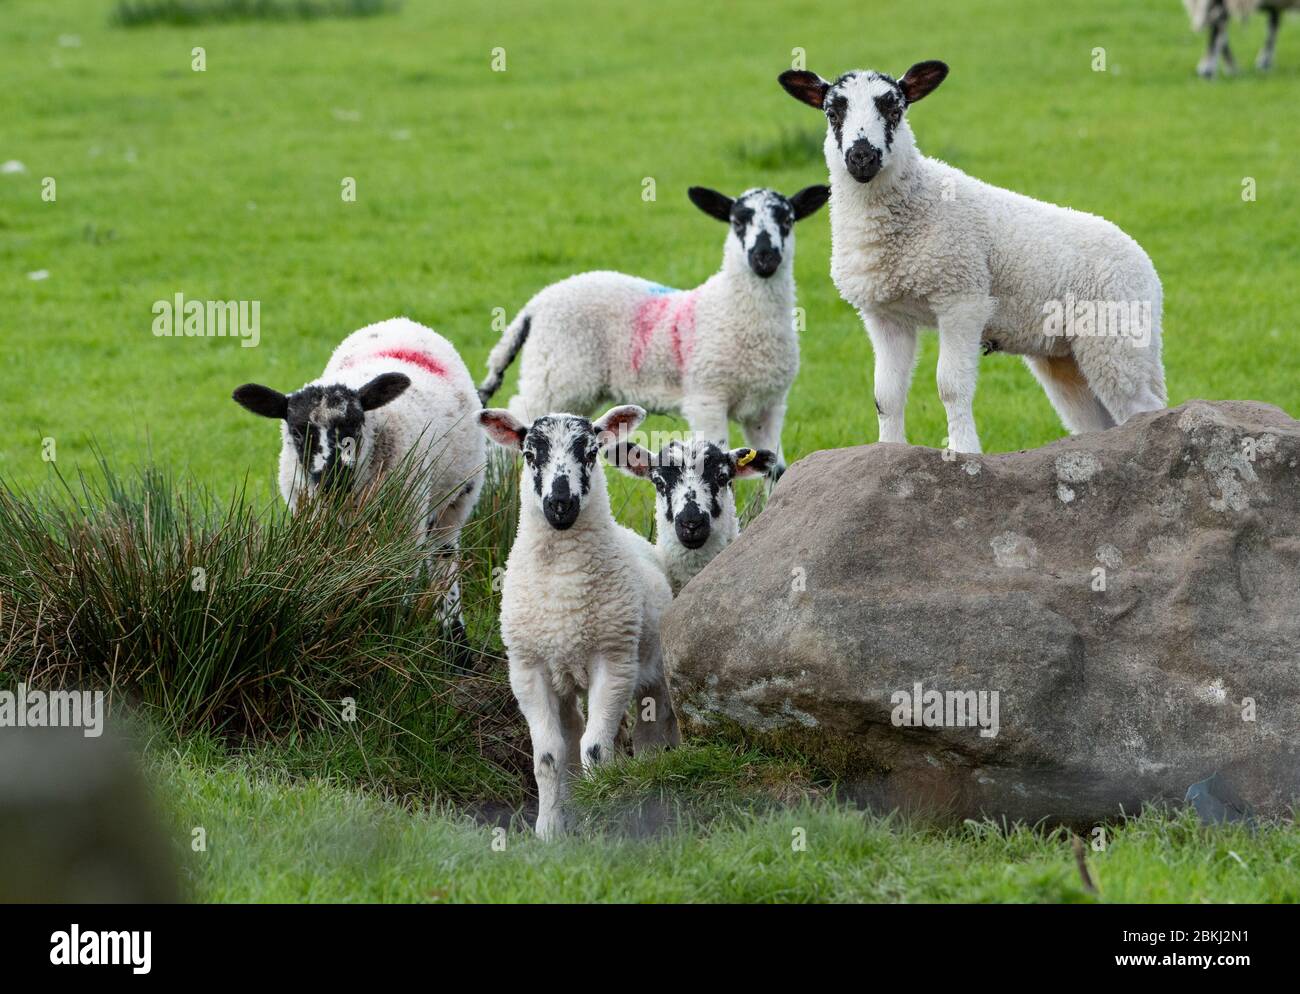 Preston, Lancashire, UK. 4th May, 2020. Lambs enjoying another fine day in some of the best weather for lambing ever at Chipping, Preston, Lancashire. UK. Credit: John Eveson/Alamy Live News Stock Photo